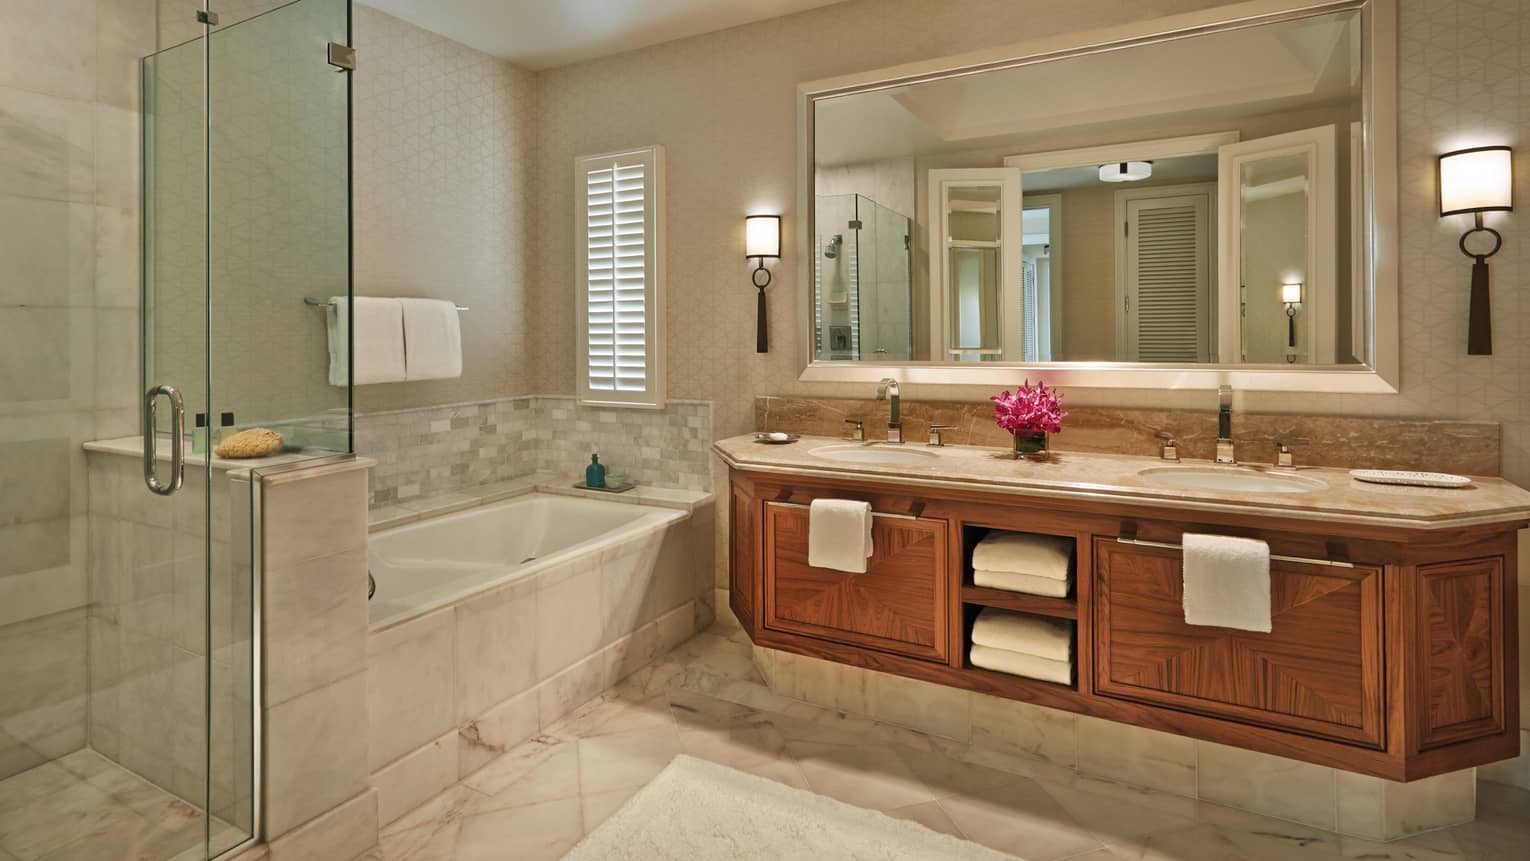 Maile Suite bathroom with double vanity, tub and shower and fresh flowers on the counter